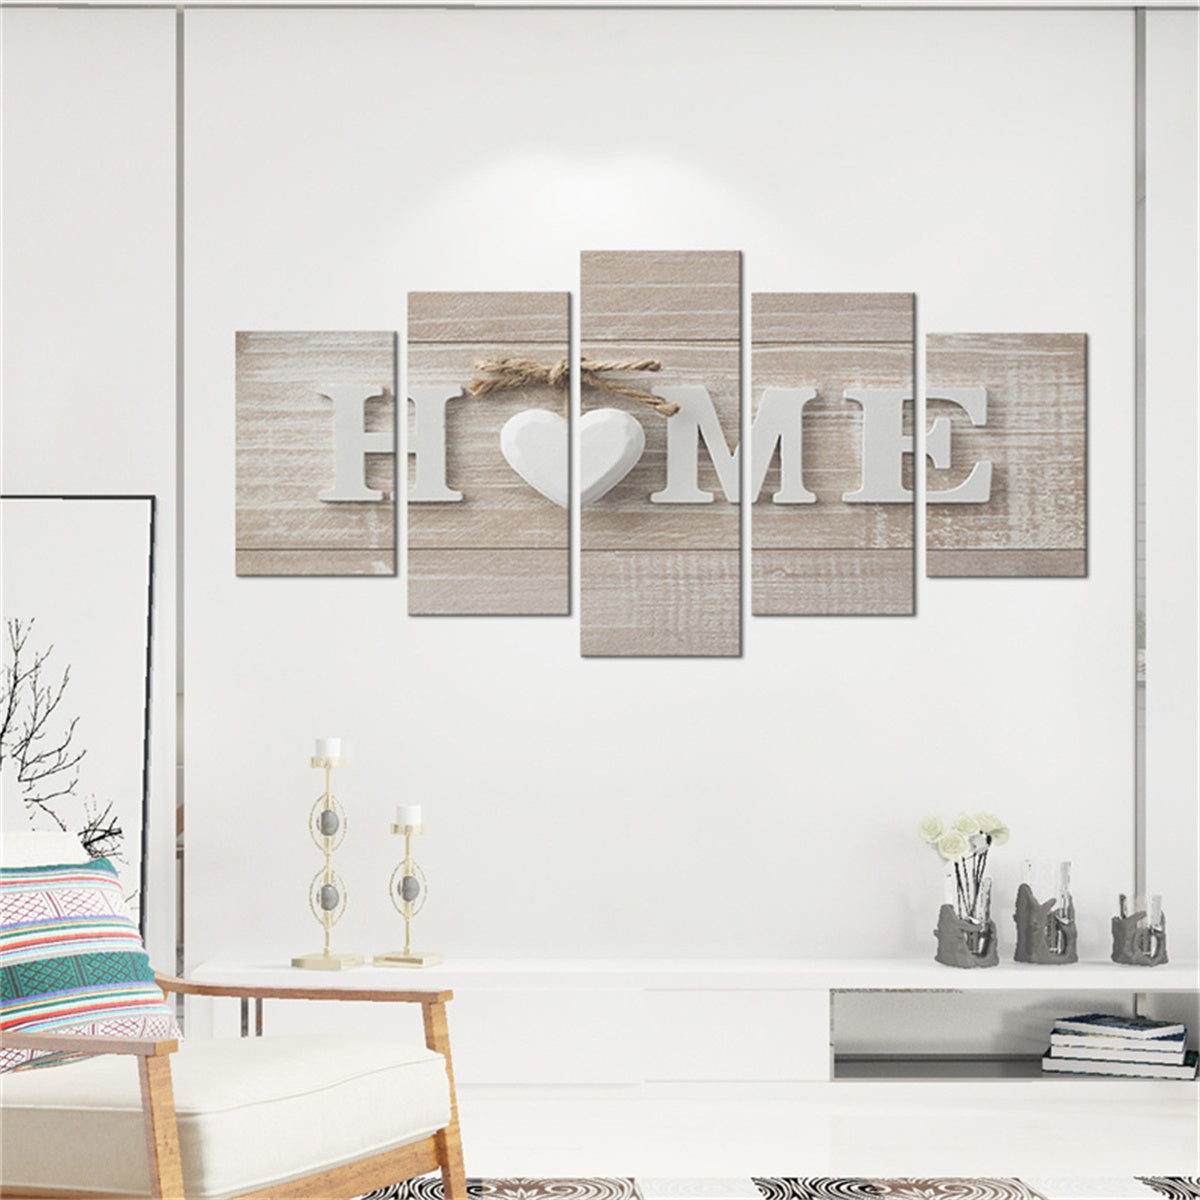 Set of 5 3D Effect Art Decorative Paintings - "HOME" Word Design (No Frame Included)